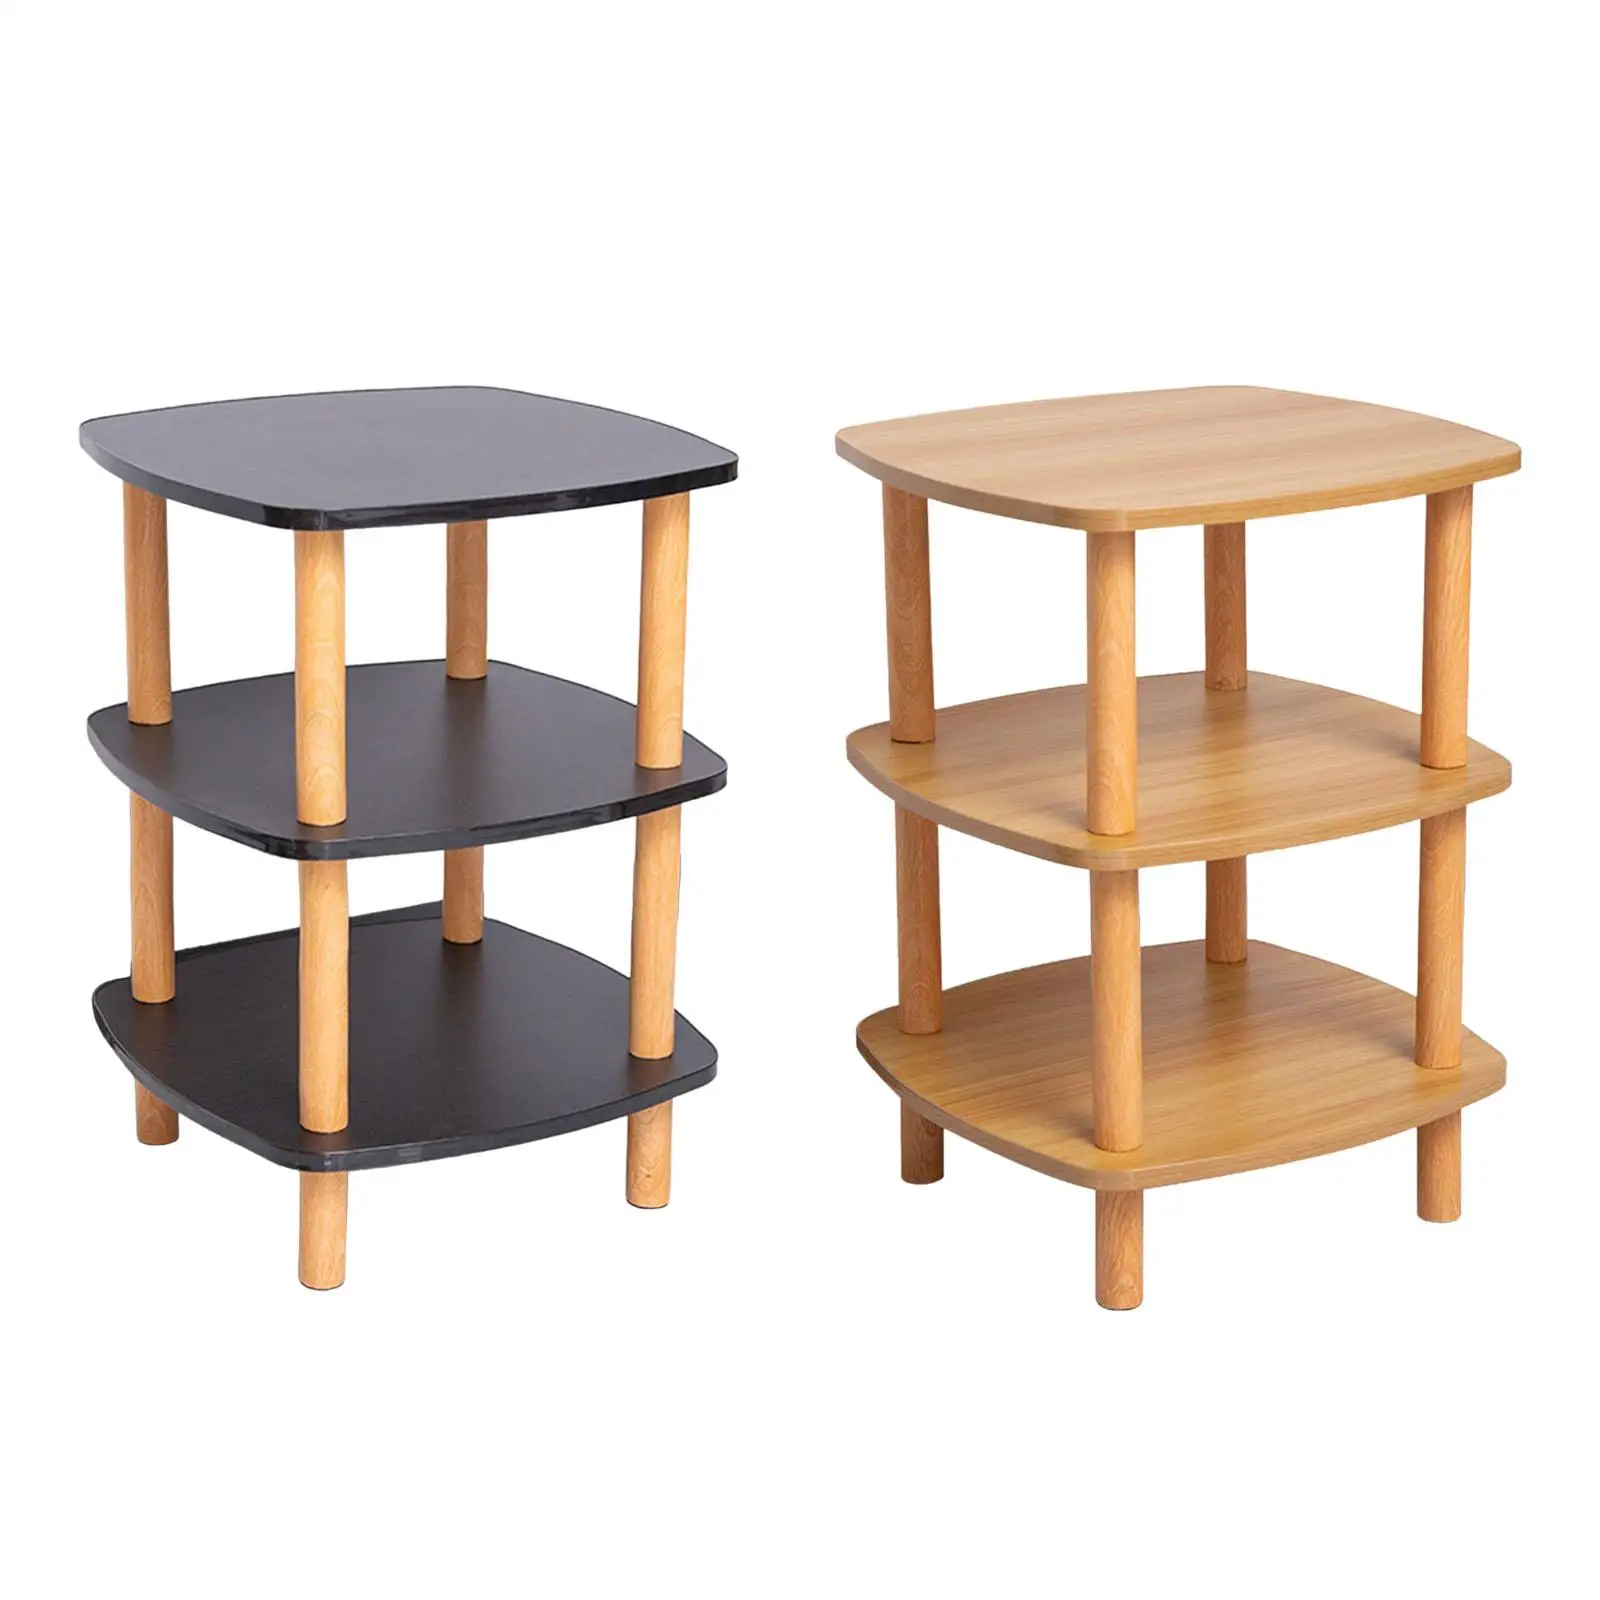 Small Side Table 3 Tier Living Room Mobile Small NightStand Drink Table Thin Side Table End Table Bedside Small Square Table